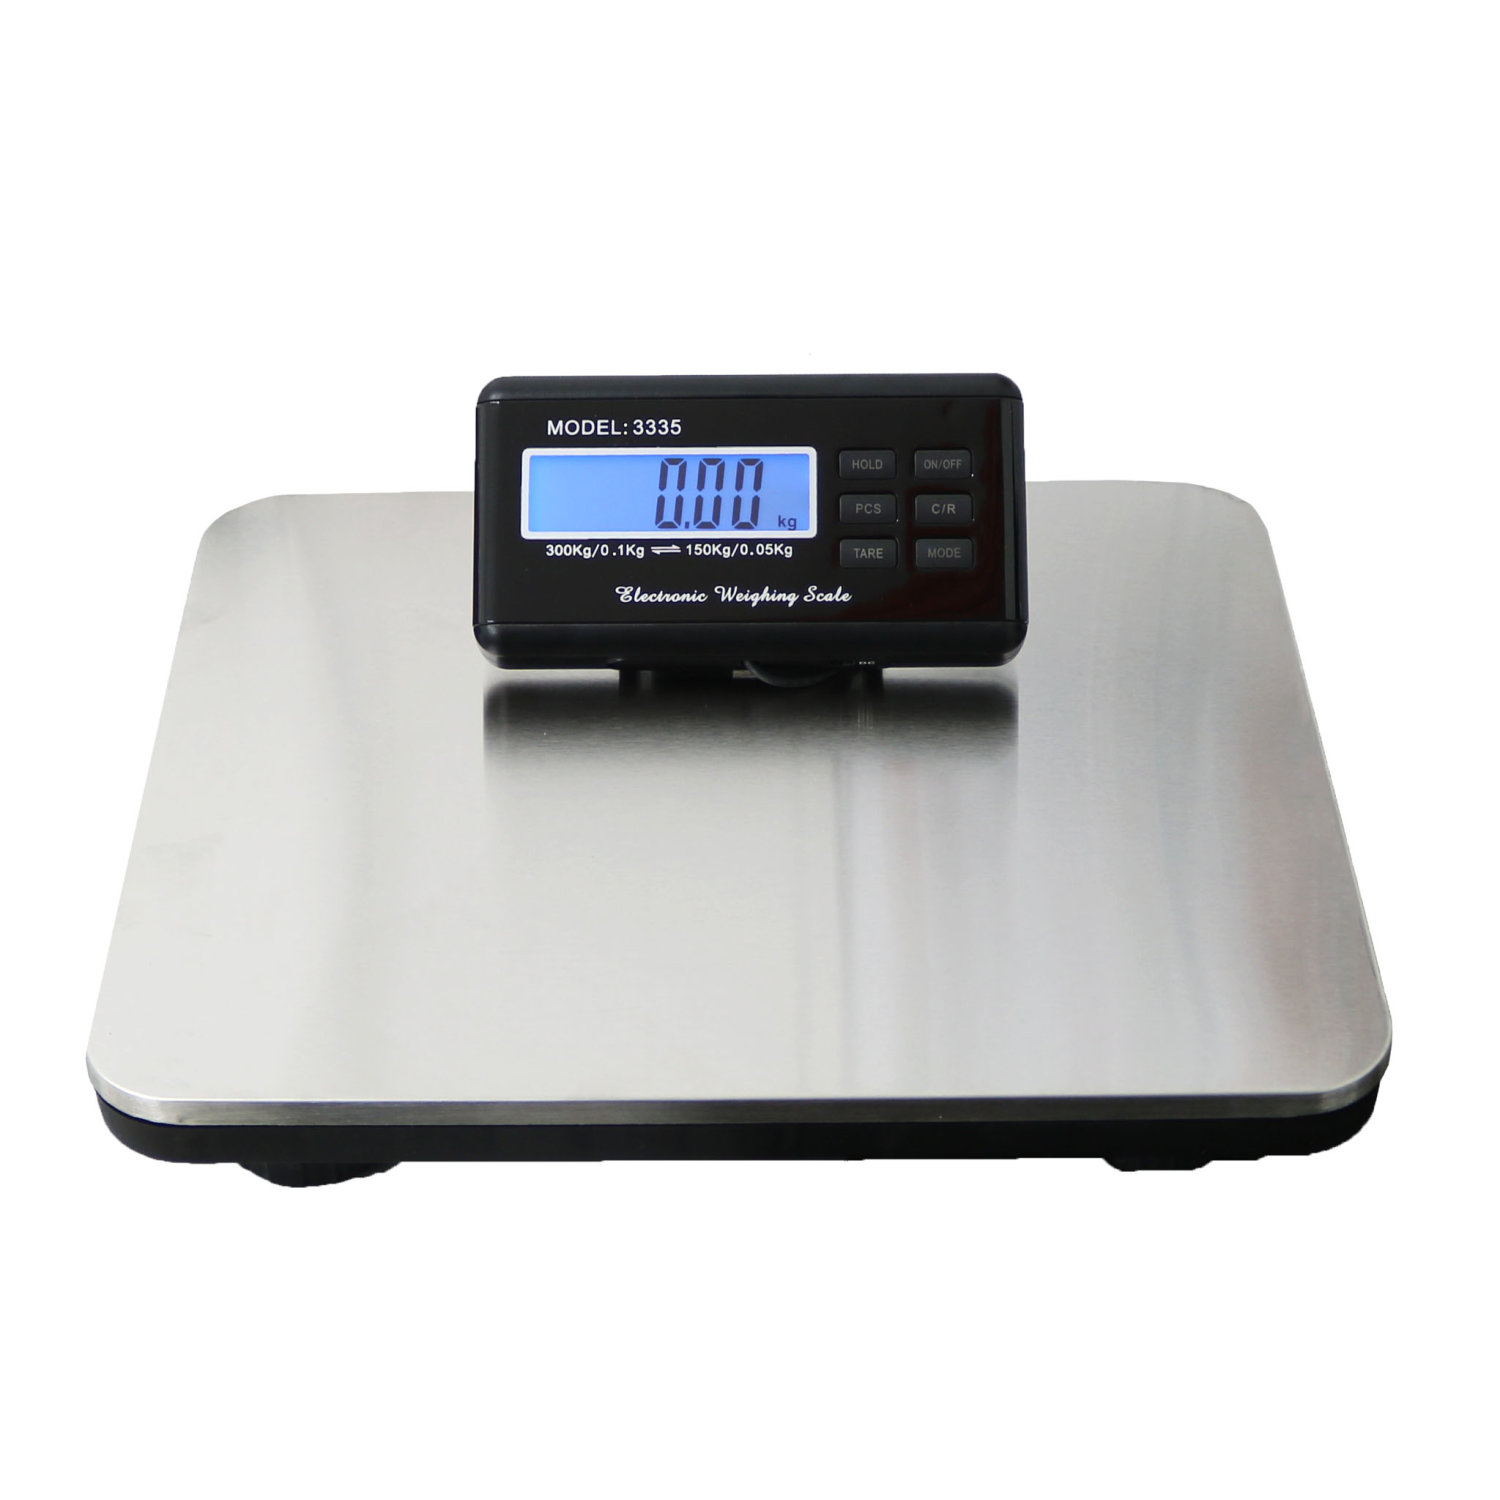 100-240V UK Plug Zerone Postal Scale 300KG Heavy Duty Postal Postage Parcel Packet Shipping Platform Scale Electronic Postal Parcel Weighing Scale with LCD Display 